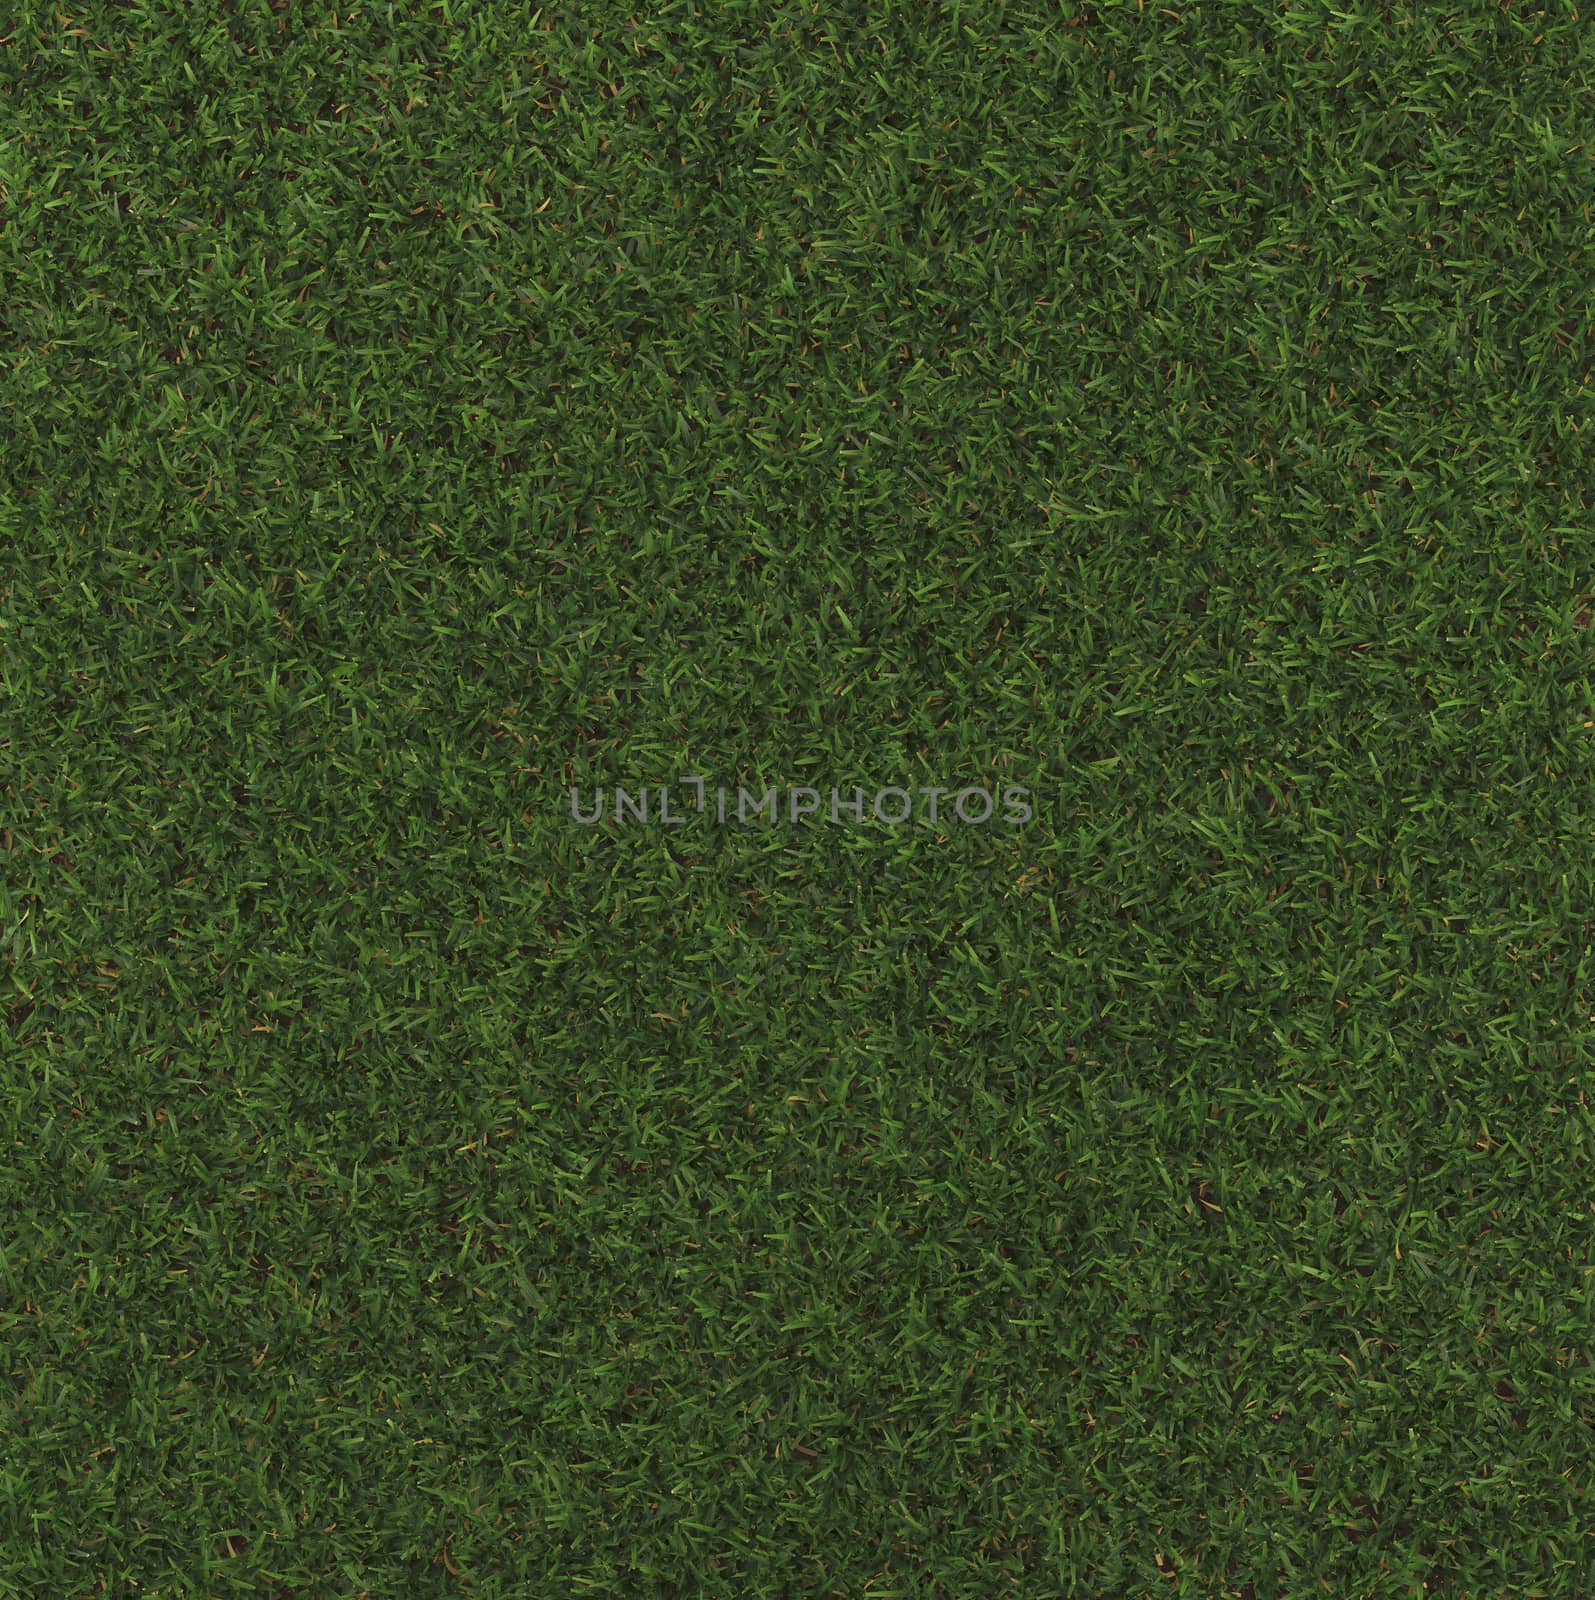 Perfect Grass in made in 3d software